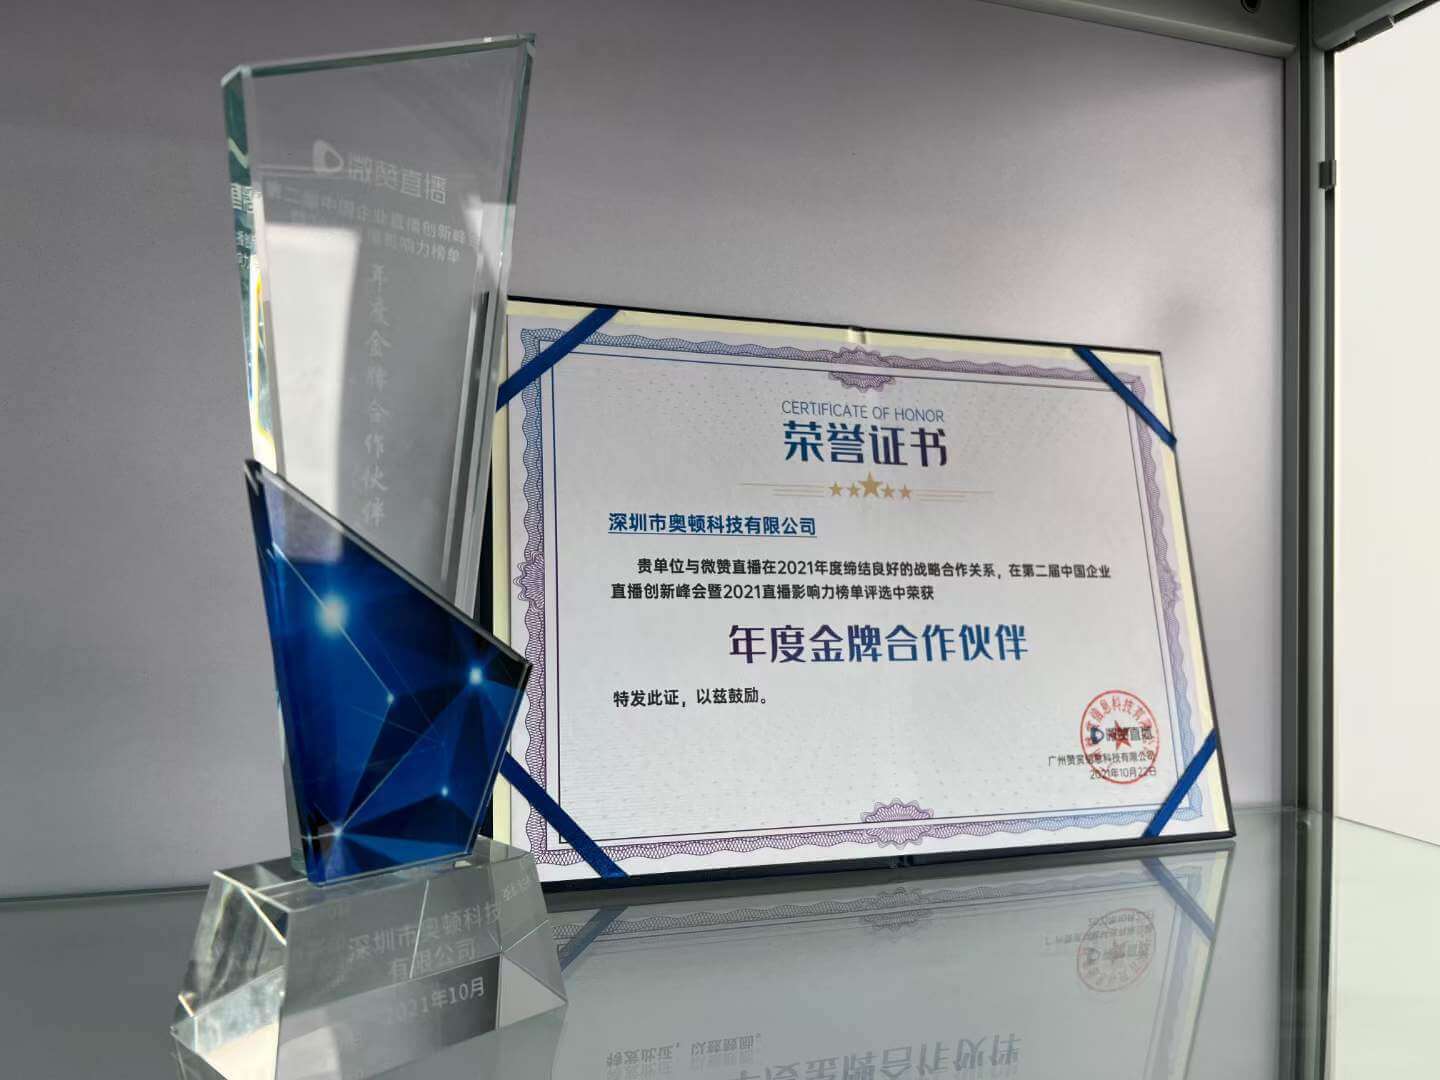 Oton technology is awarded Gold Parter of The Year by Vzan Cloud Platform oton technology